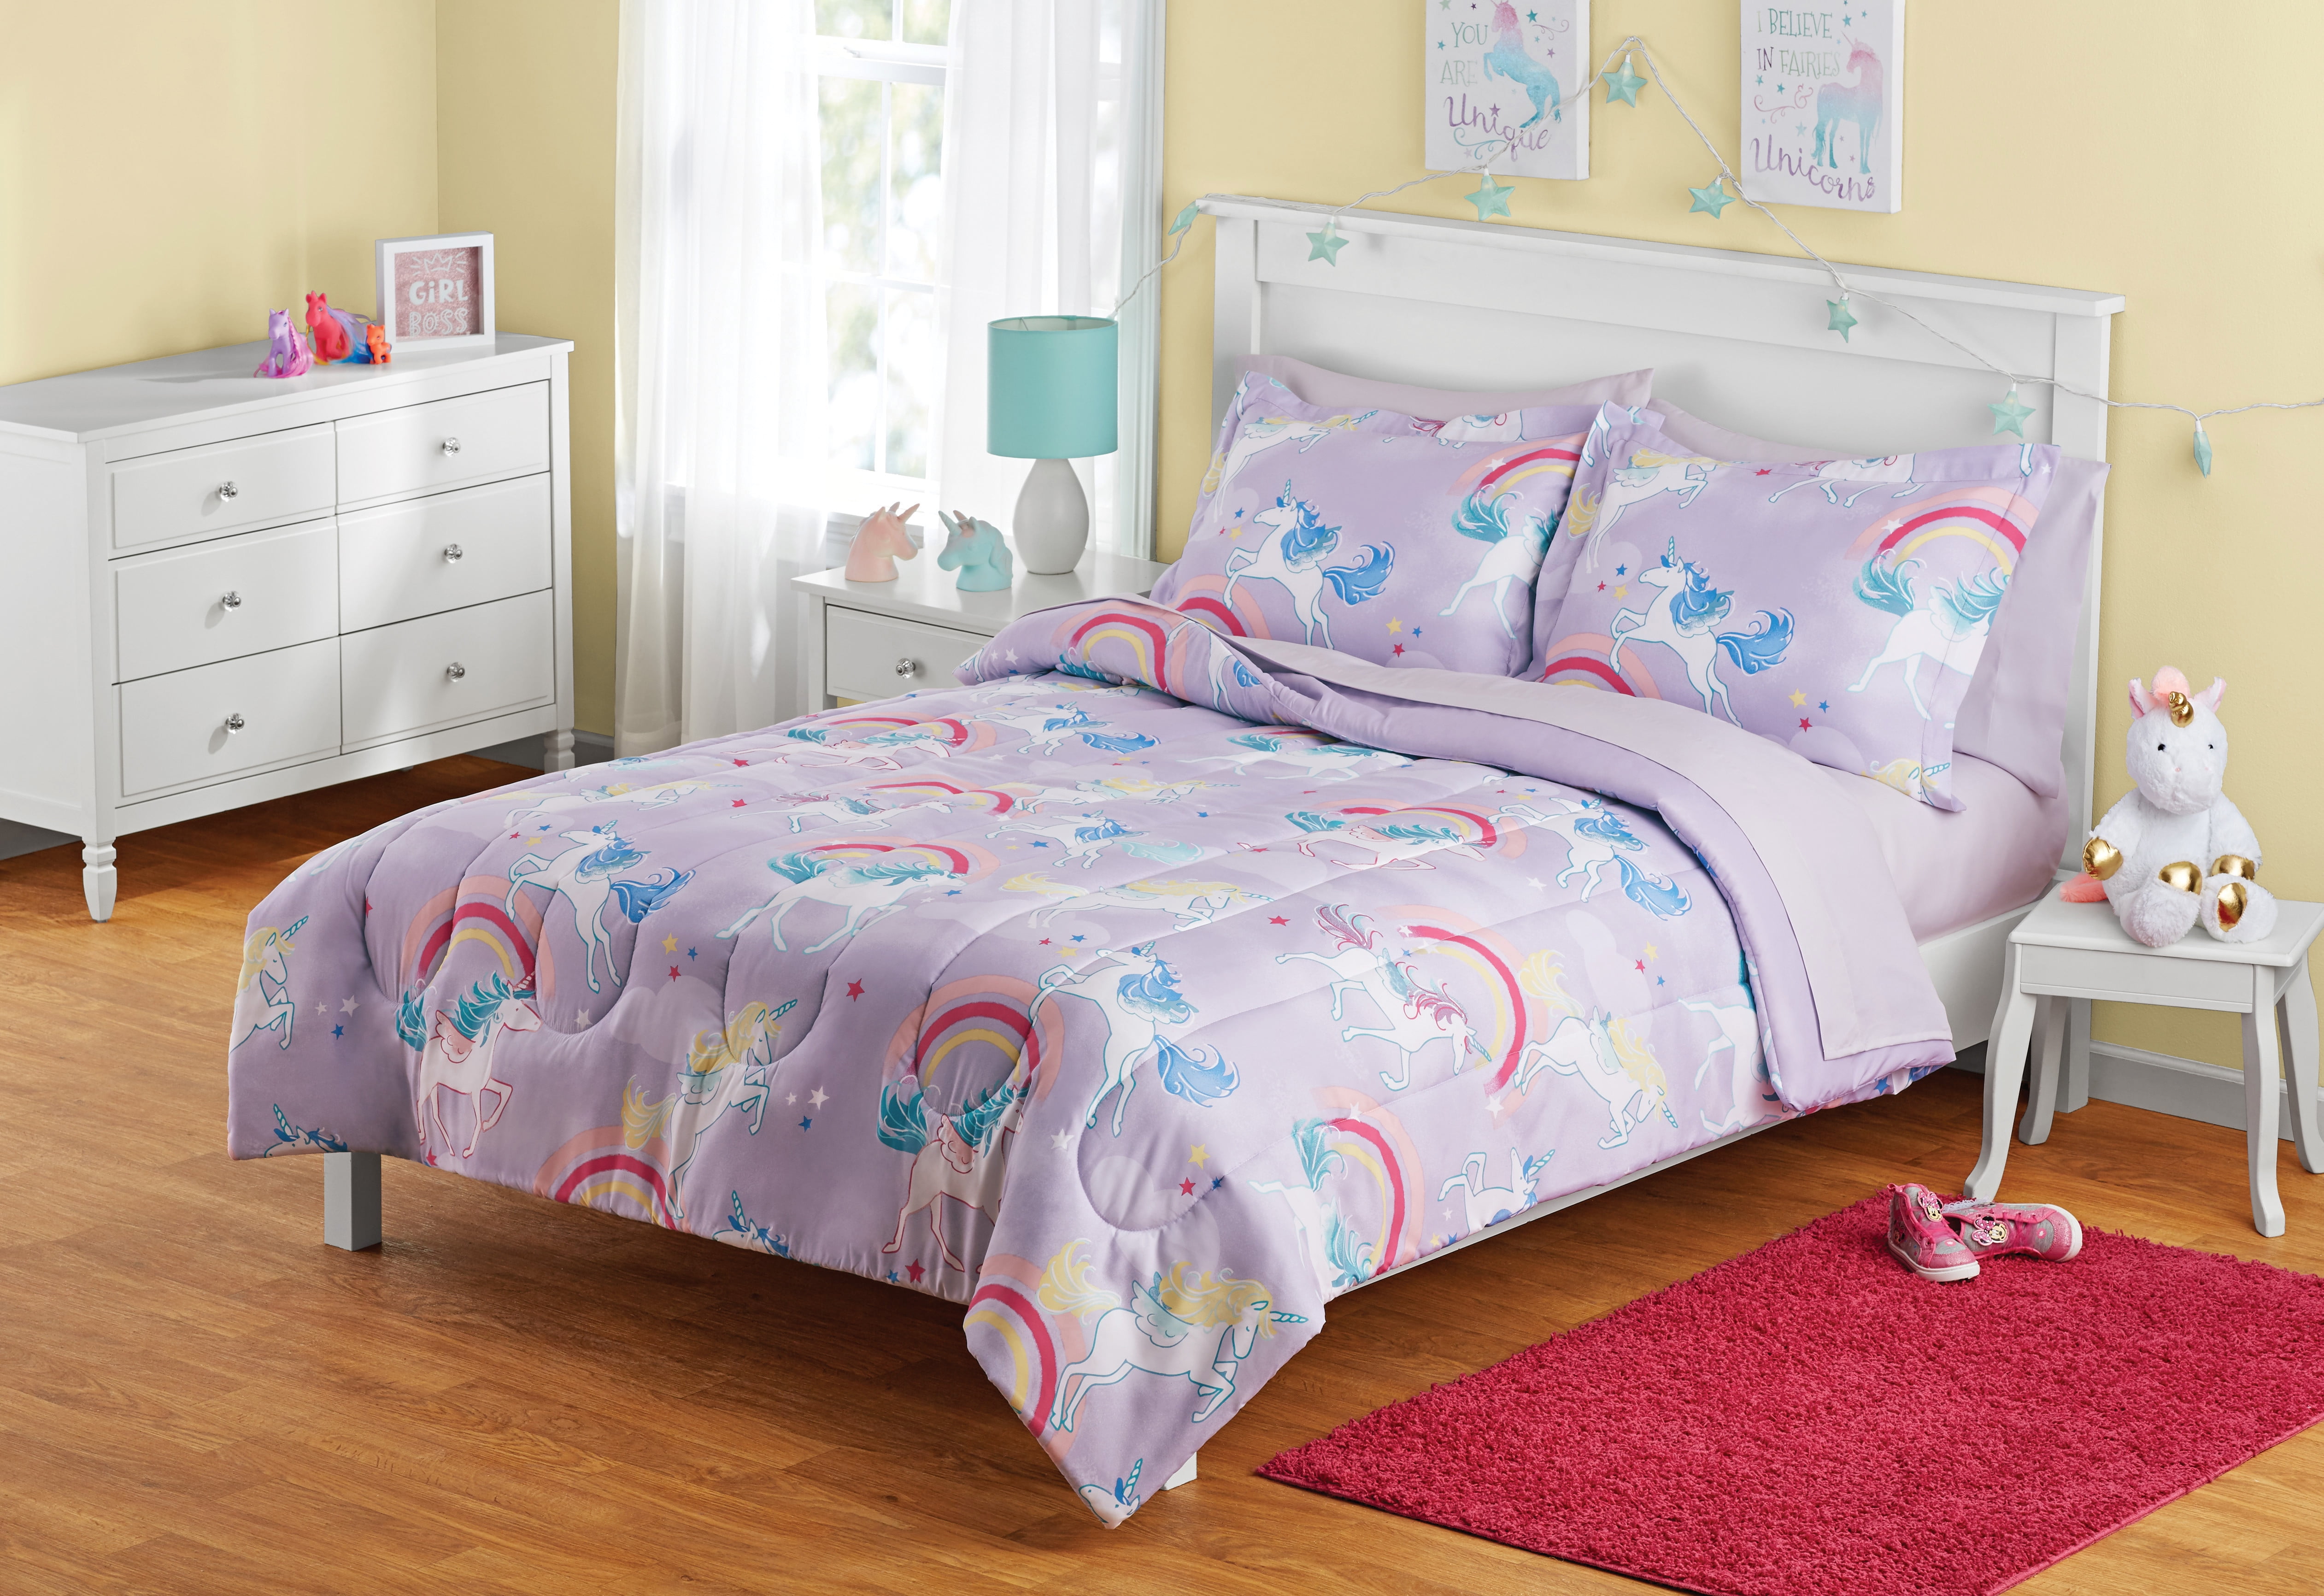 TWIN SIZE KIDS BED IN A BAG SET Rainbow Unicorn Pink Design Home Child Bedroom